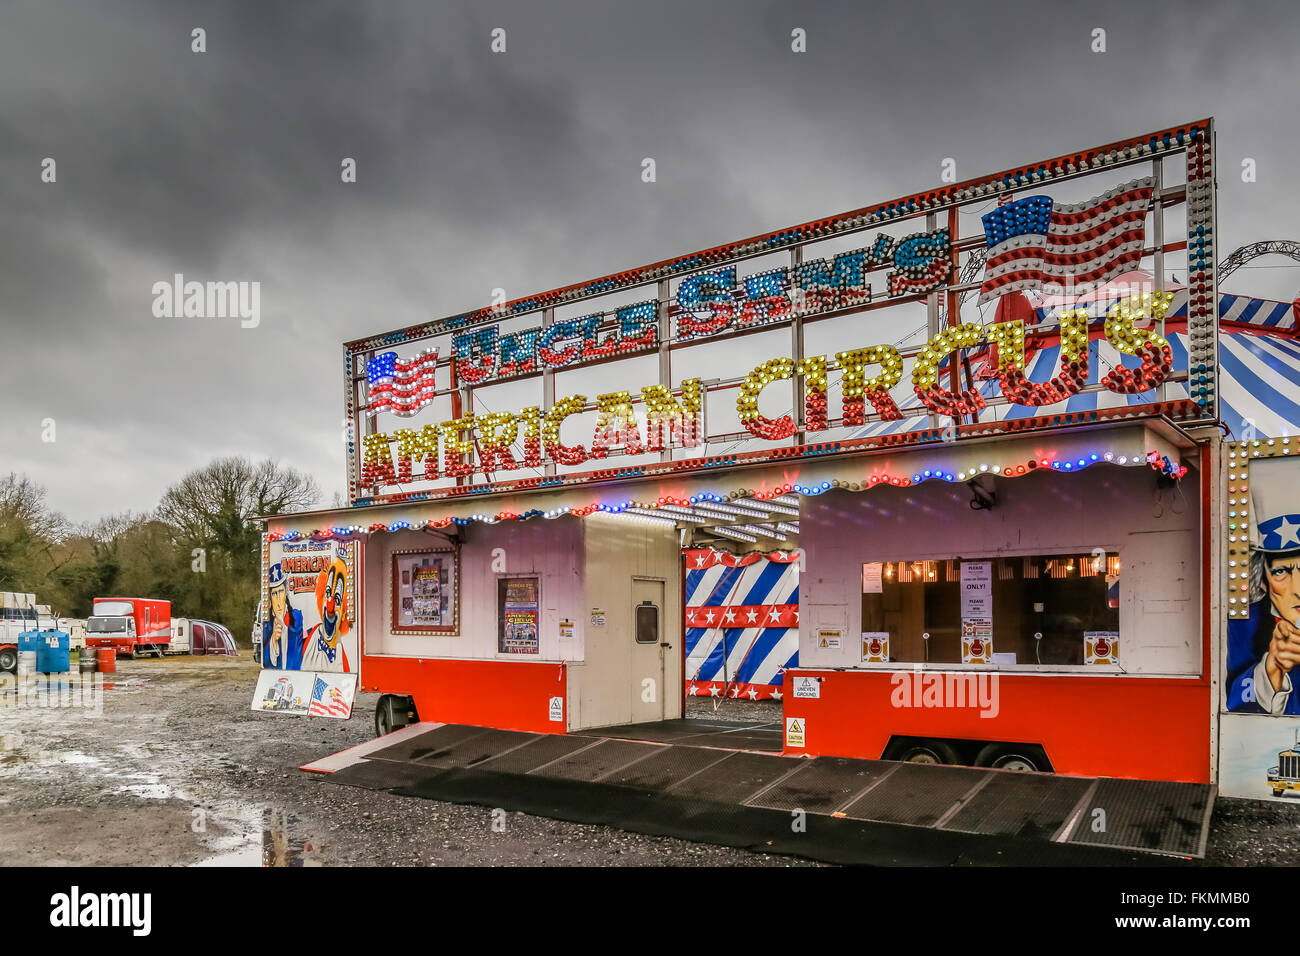 The ticket office for Uncle Sam's American Circus on tour in the UK on a wet and rainy day Stock Photo